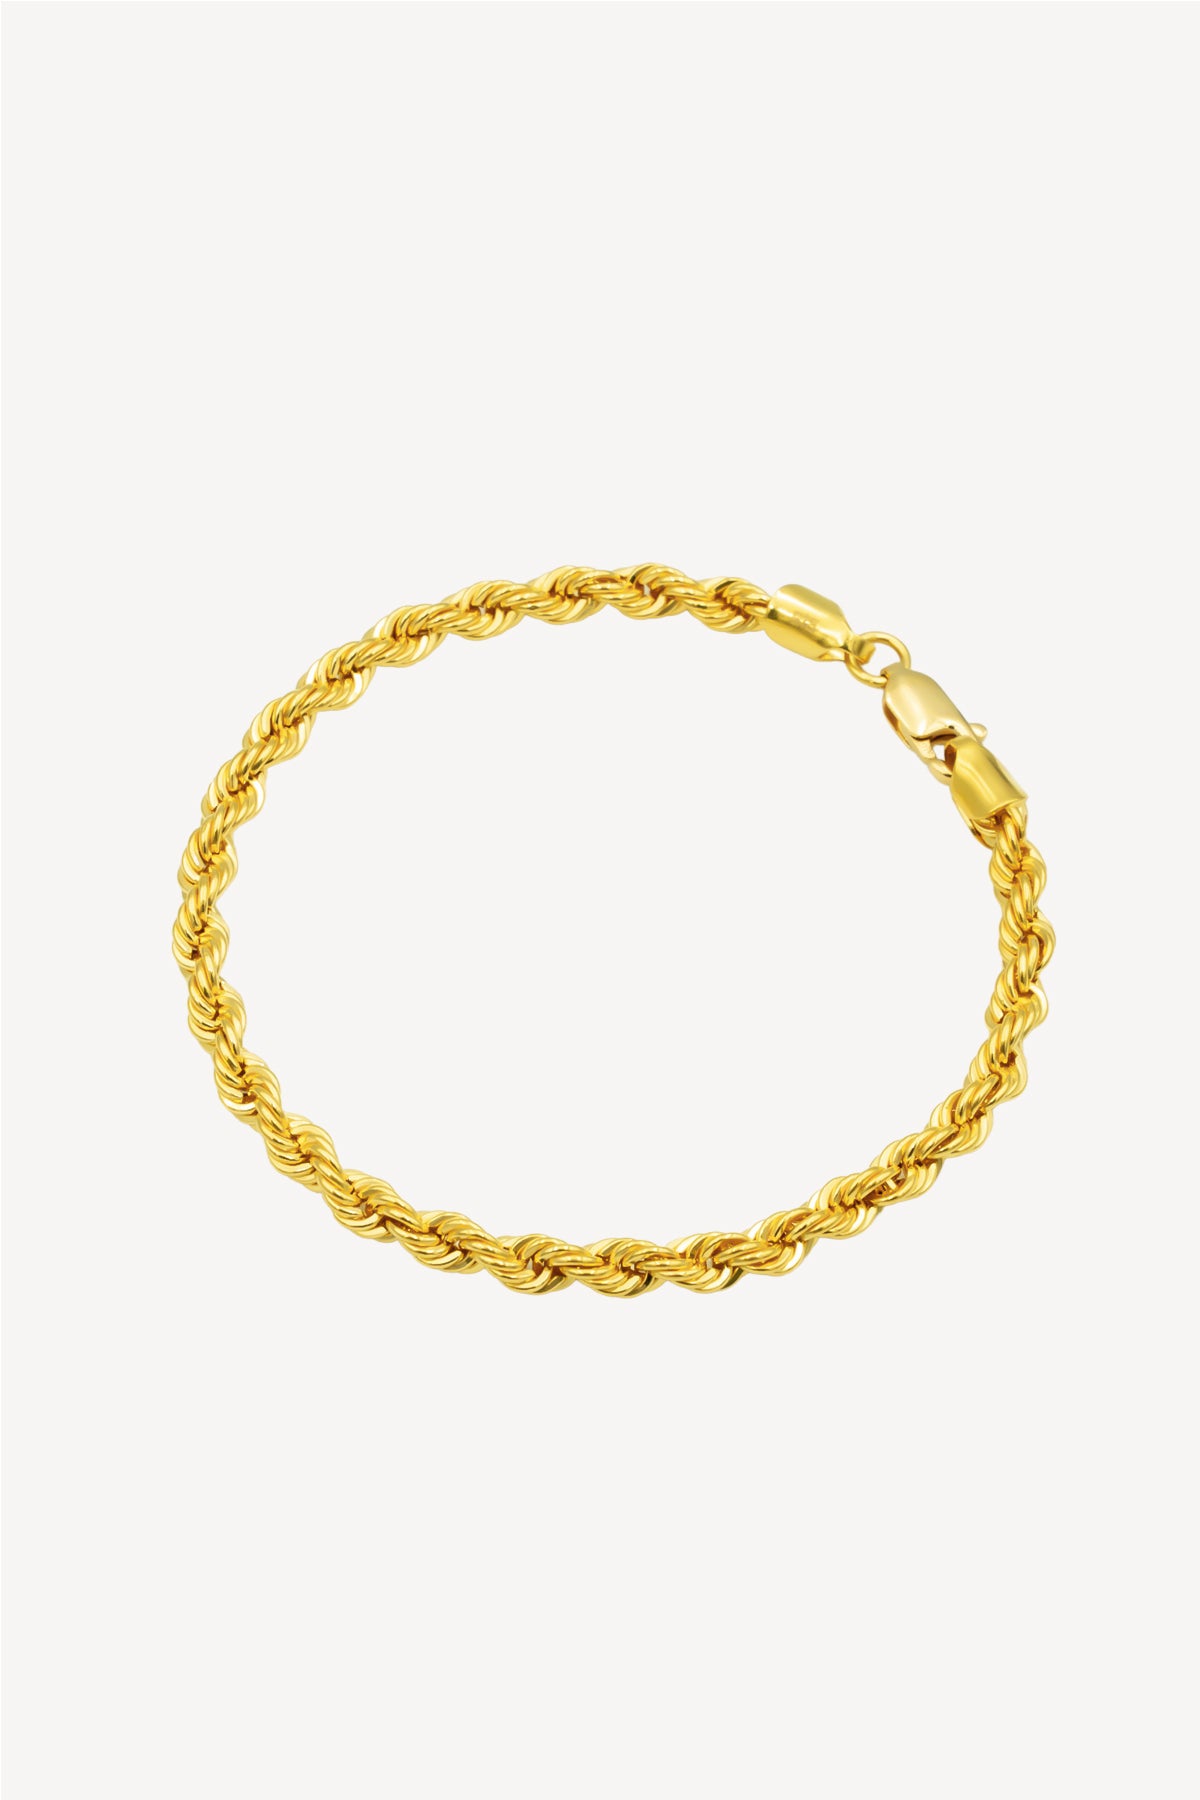 916 Gold Hollow rope bracelet for ladies